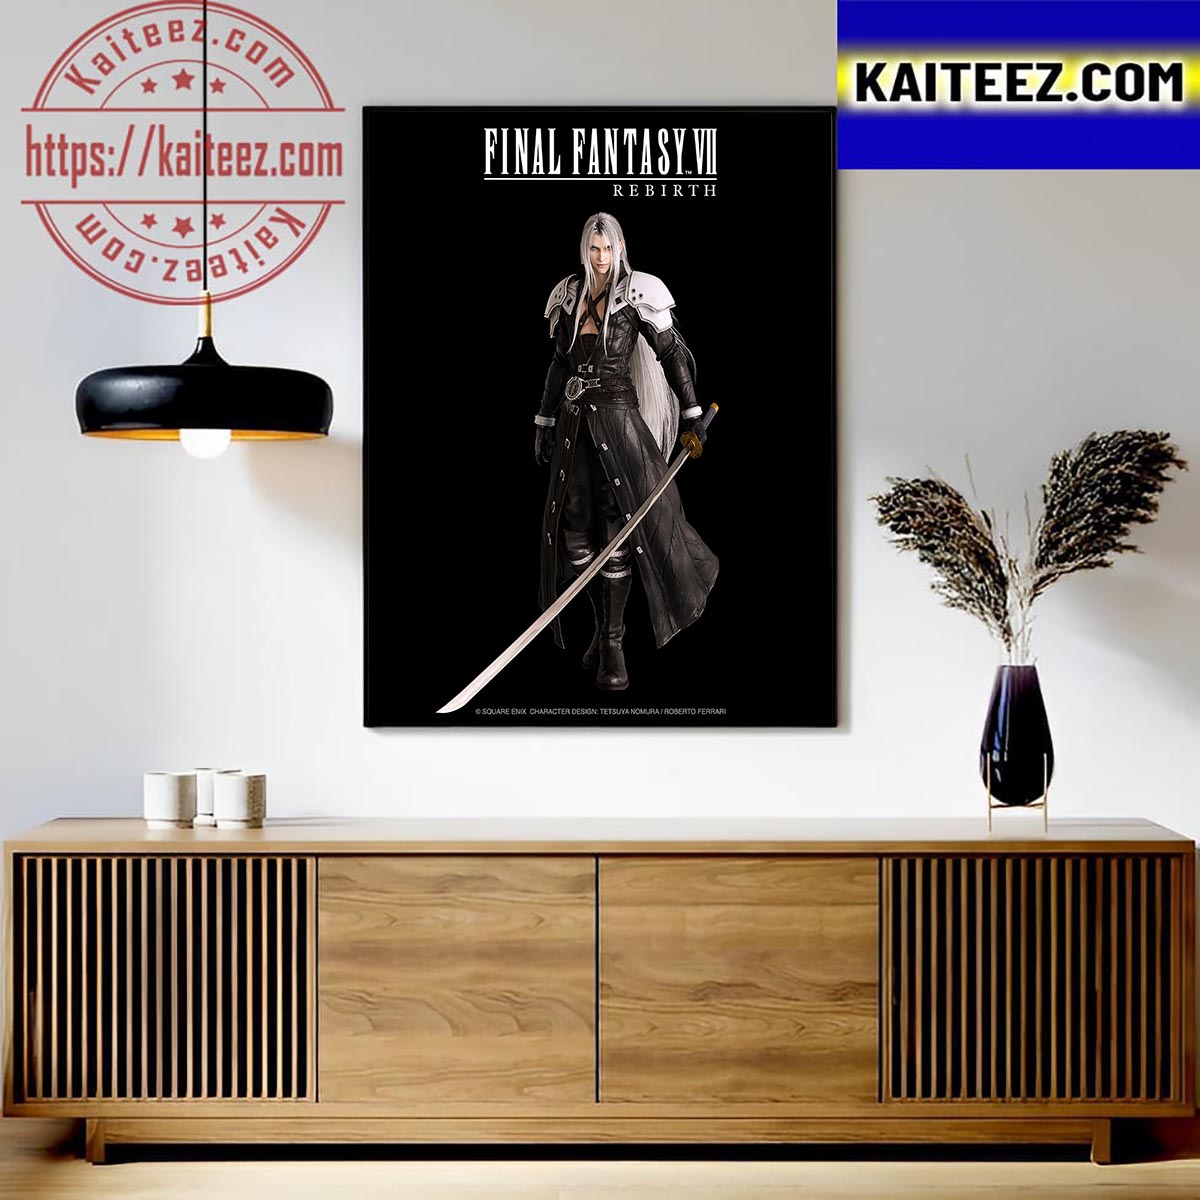 New Poster For Sephiroth In Final Fantasy VII Rebirth Art Decor Poster Canvas